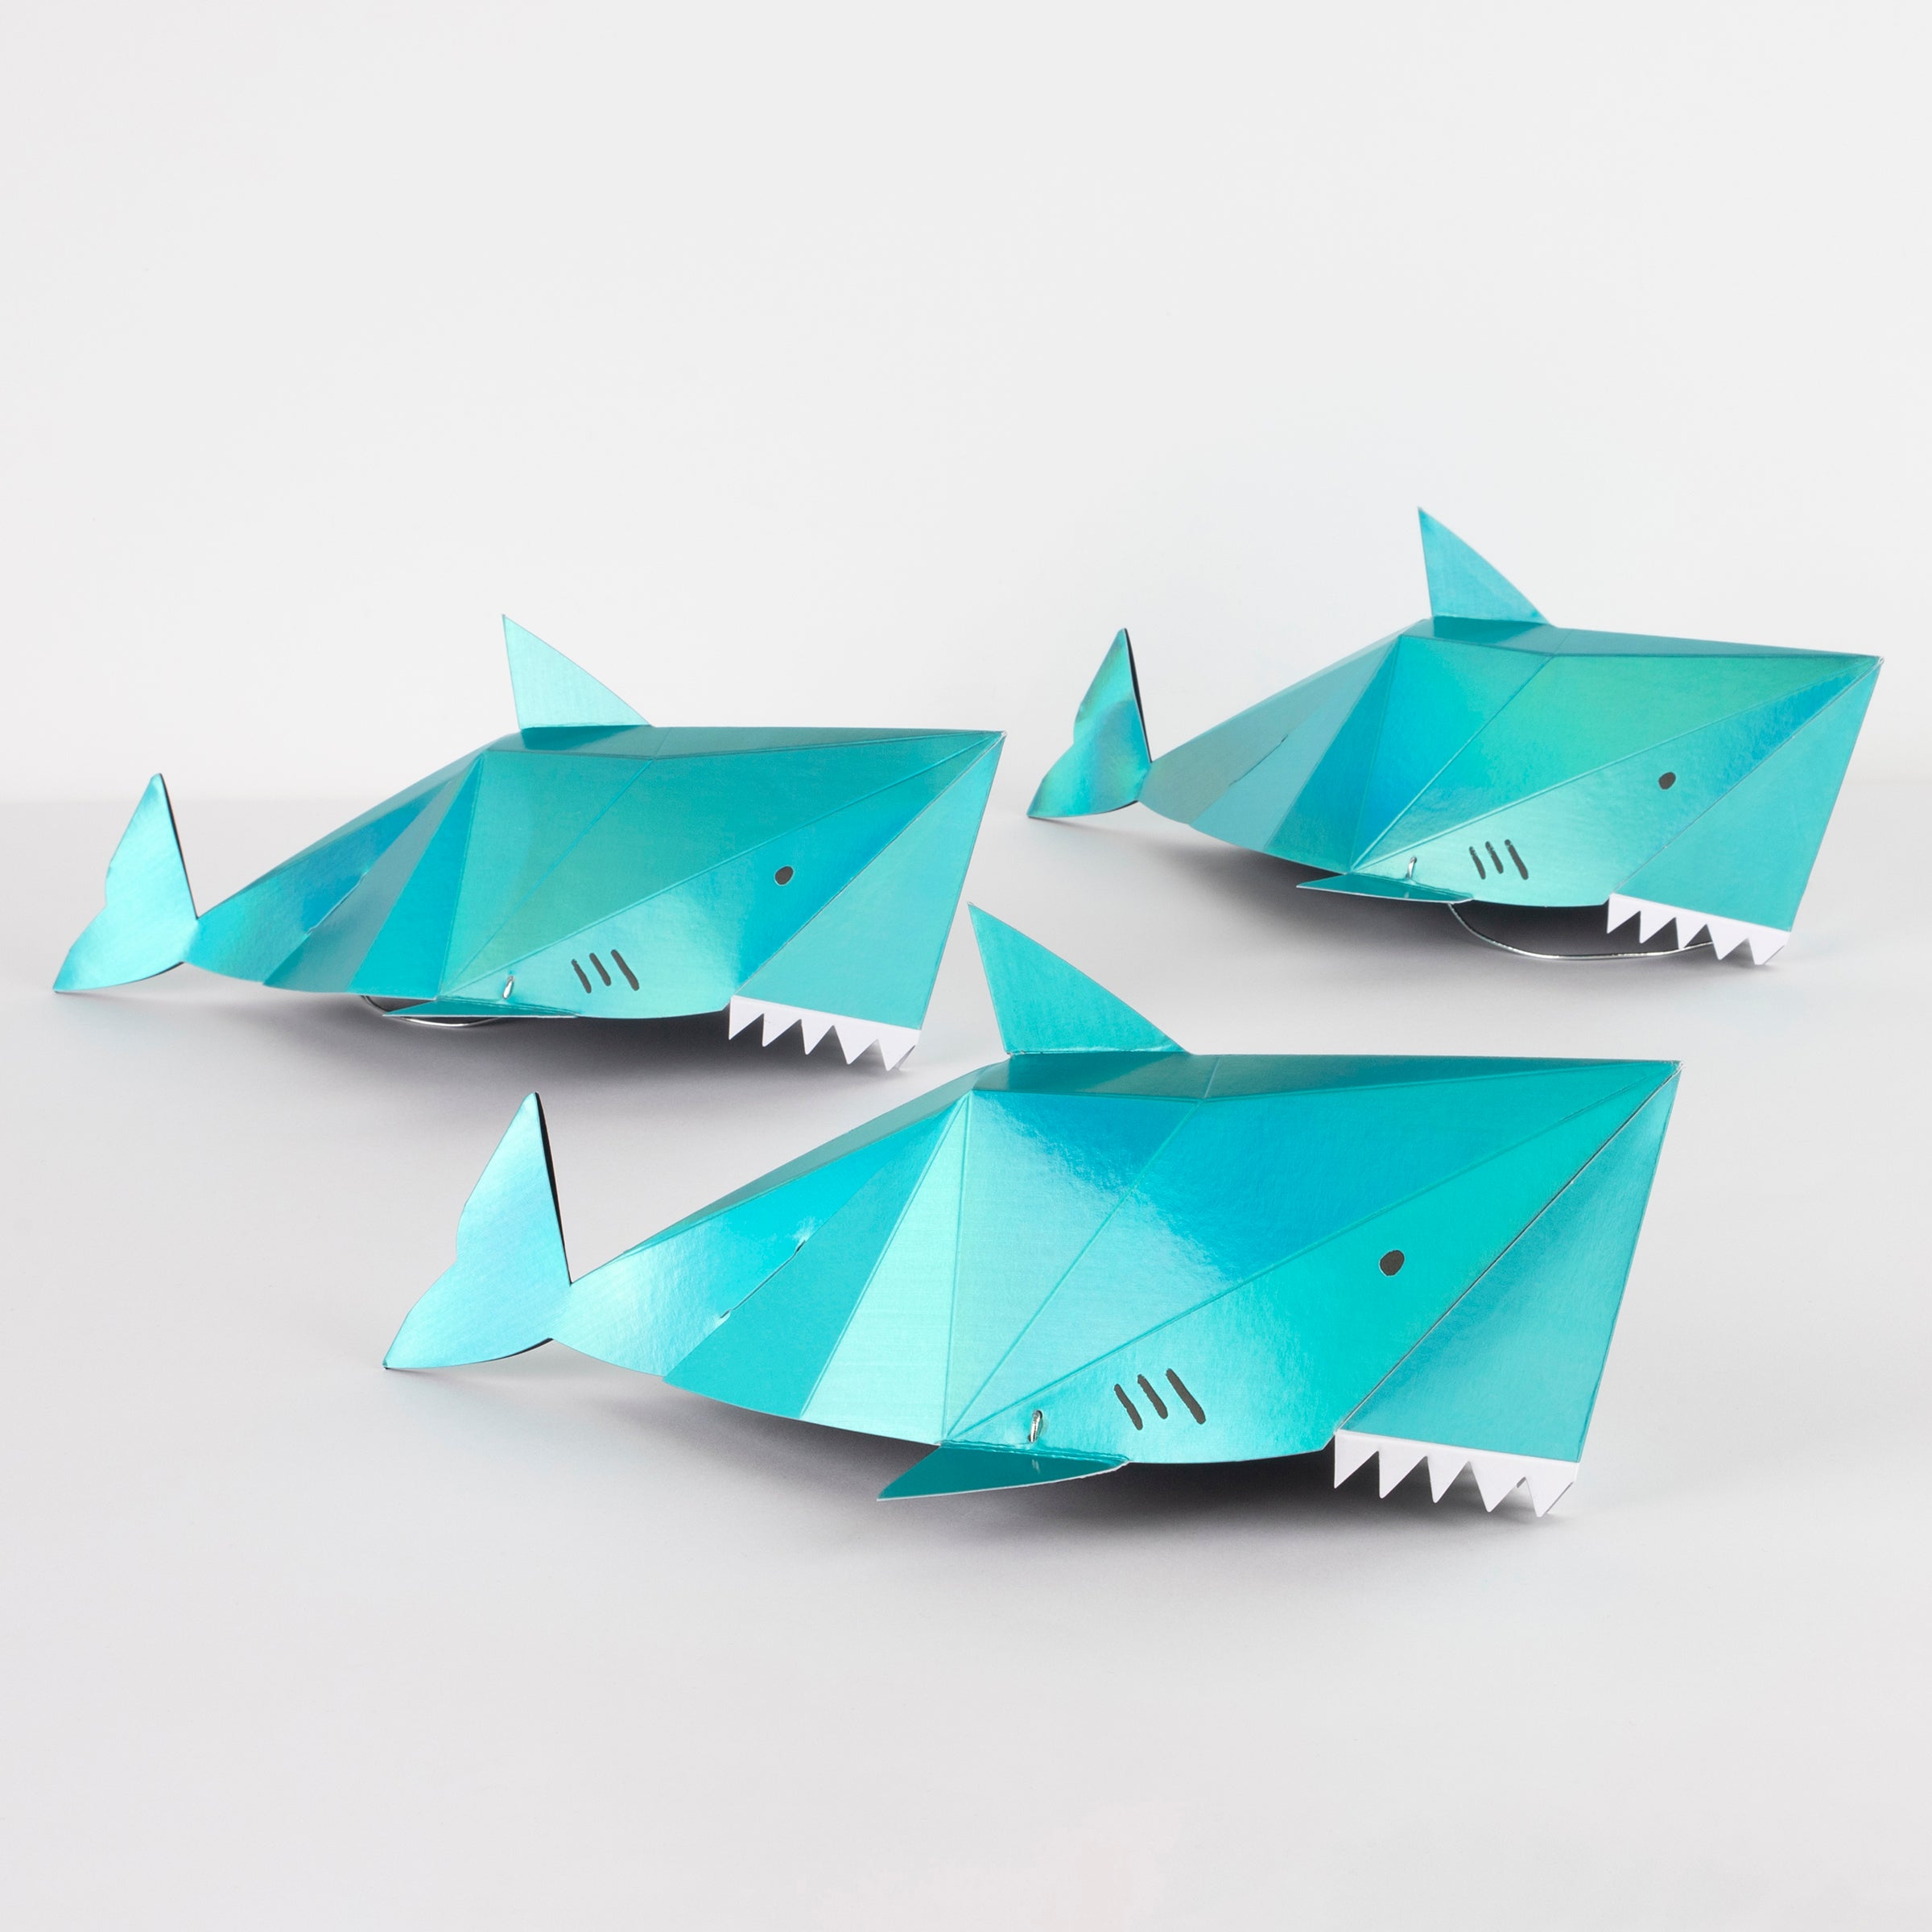 Our hats in the shape of a shark make spectacular paper party hats.